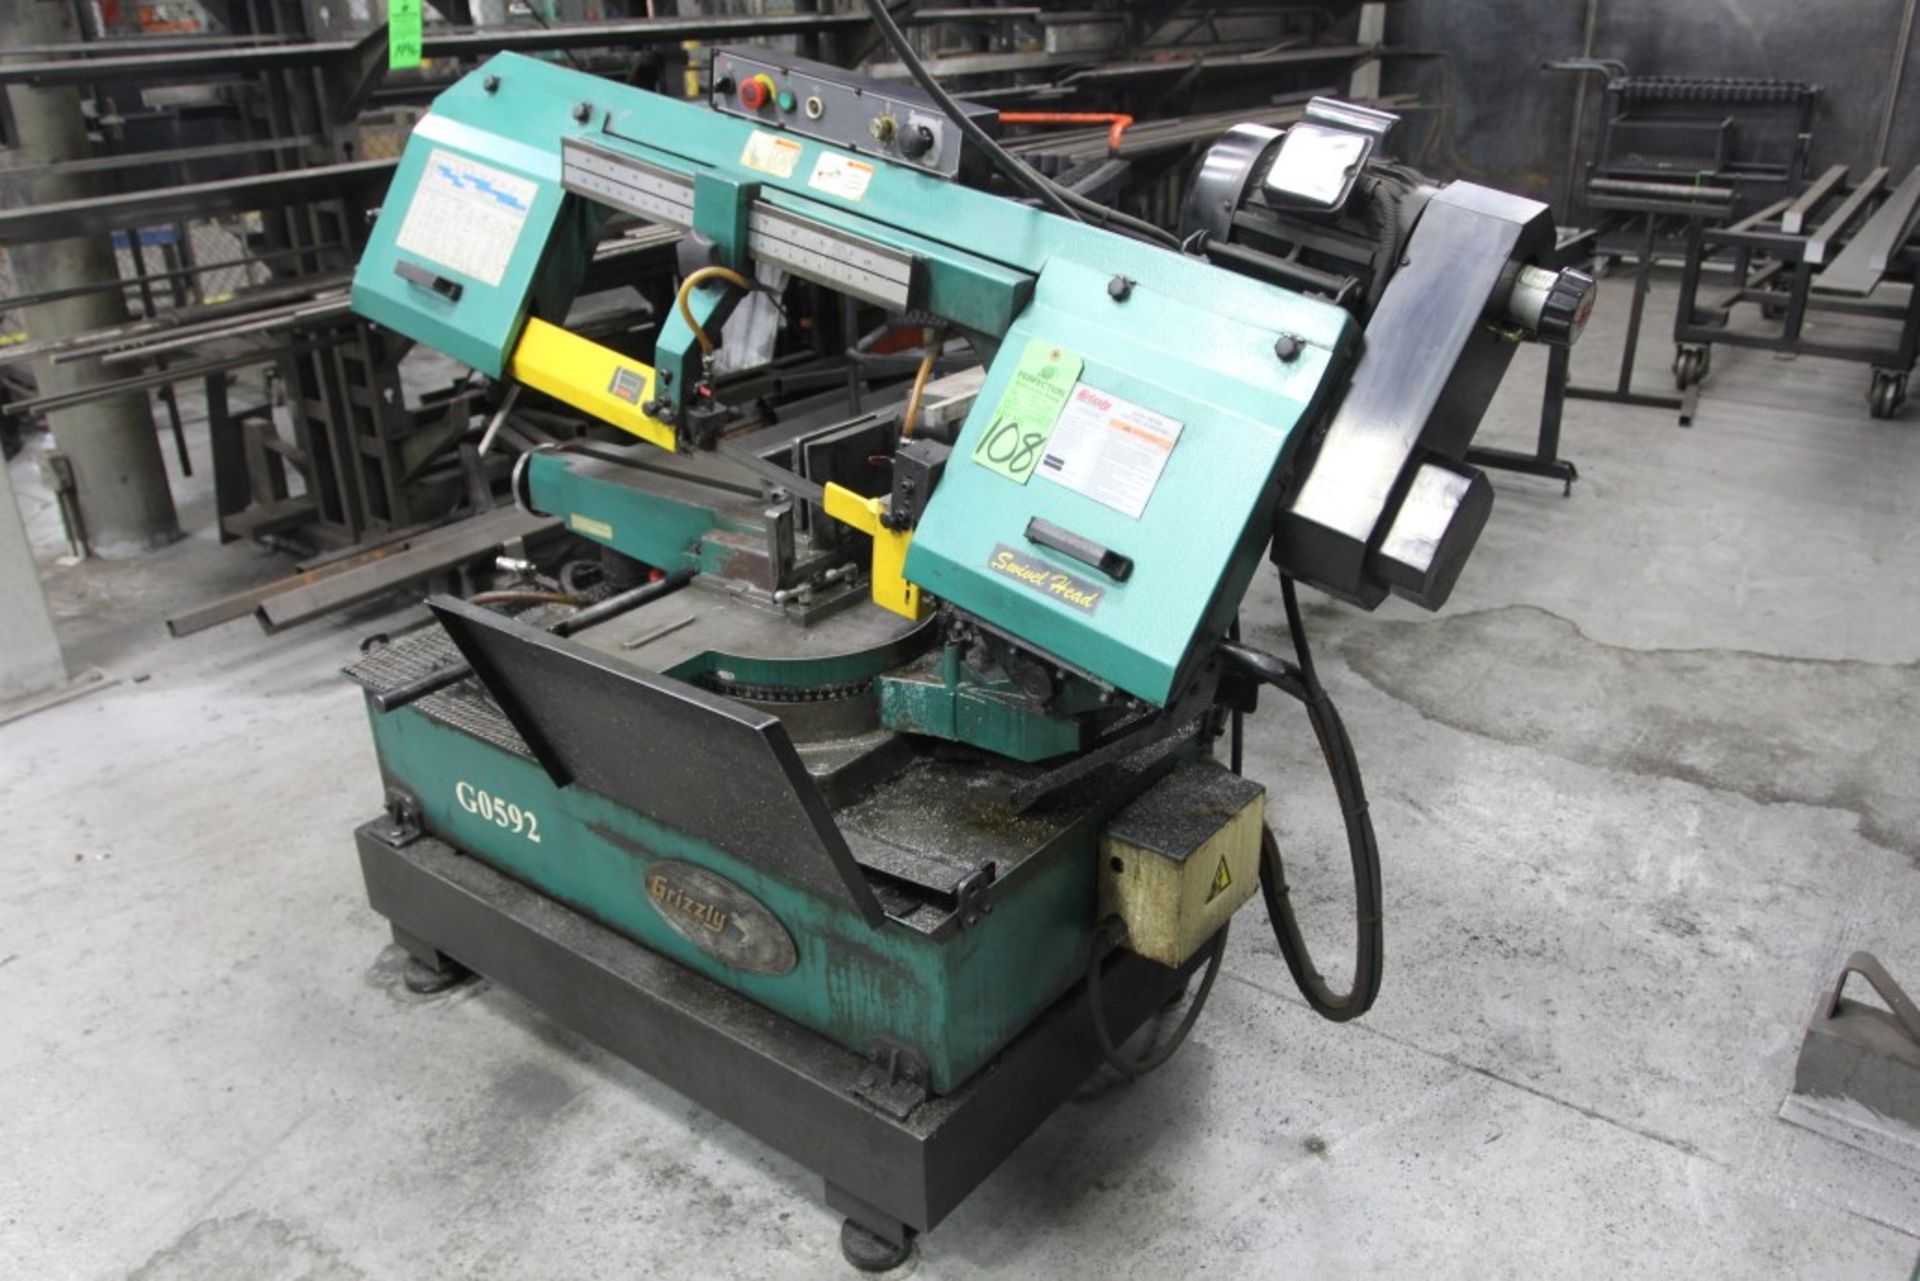 Grizzly G0592 Horizontal Bandsaw, S/N. 590476 - Image 3 of 5